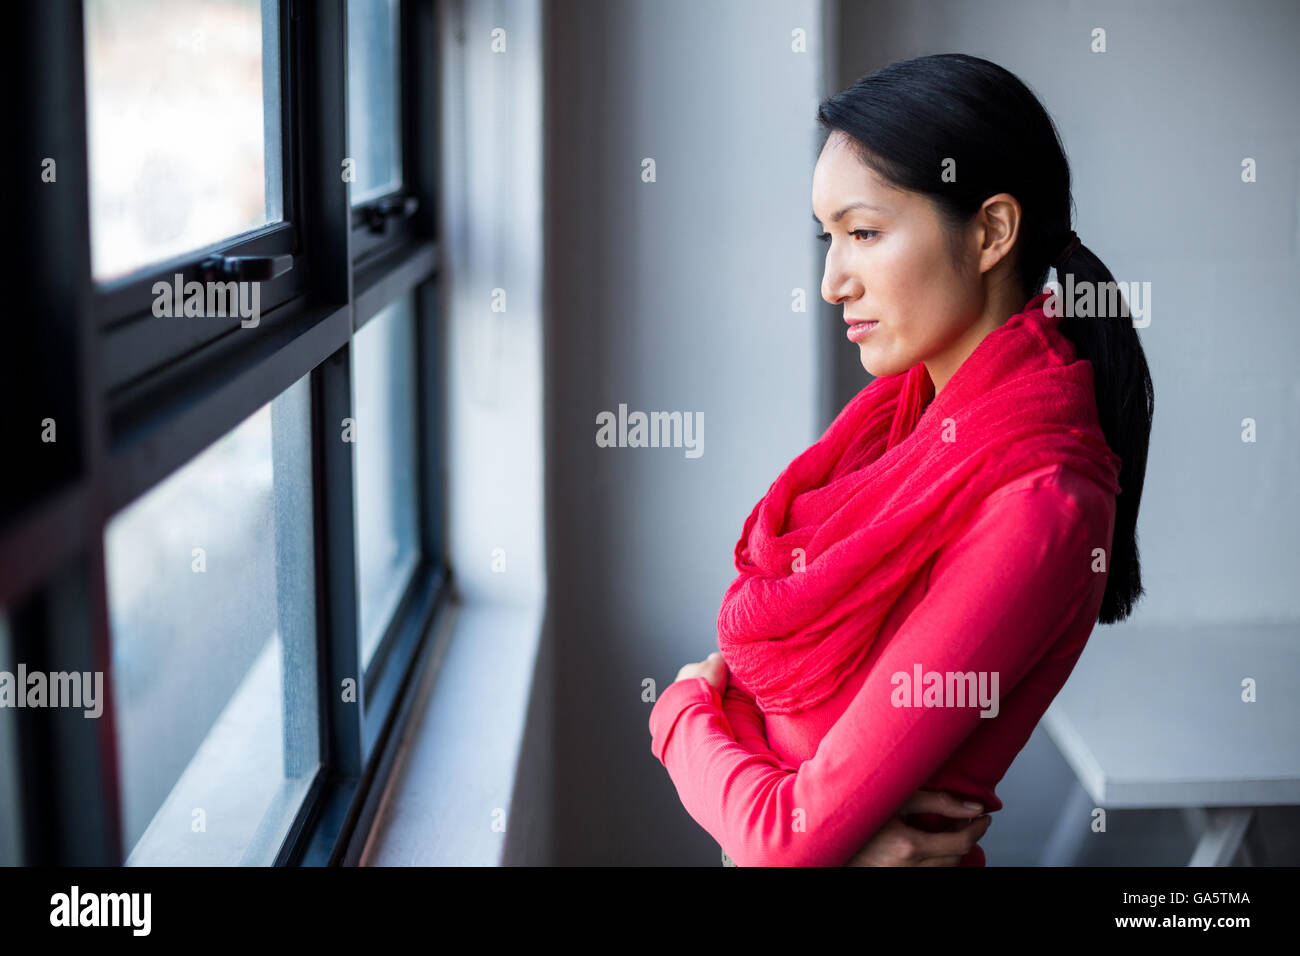 Thoughtful woman standing by window in office Banque D'Images